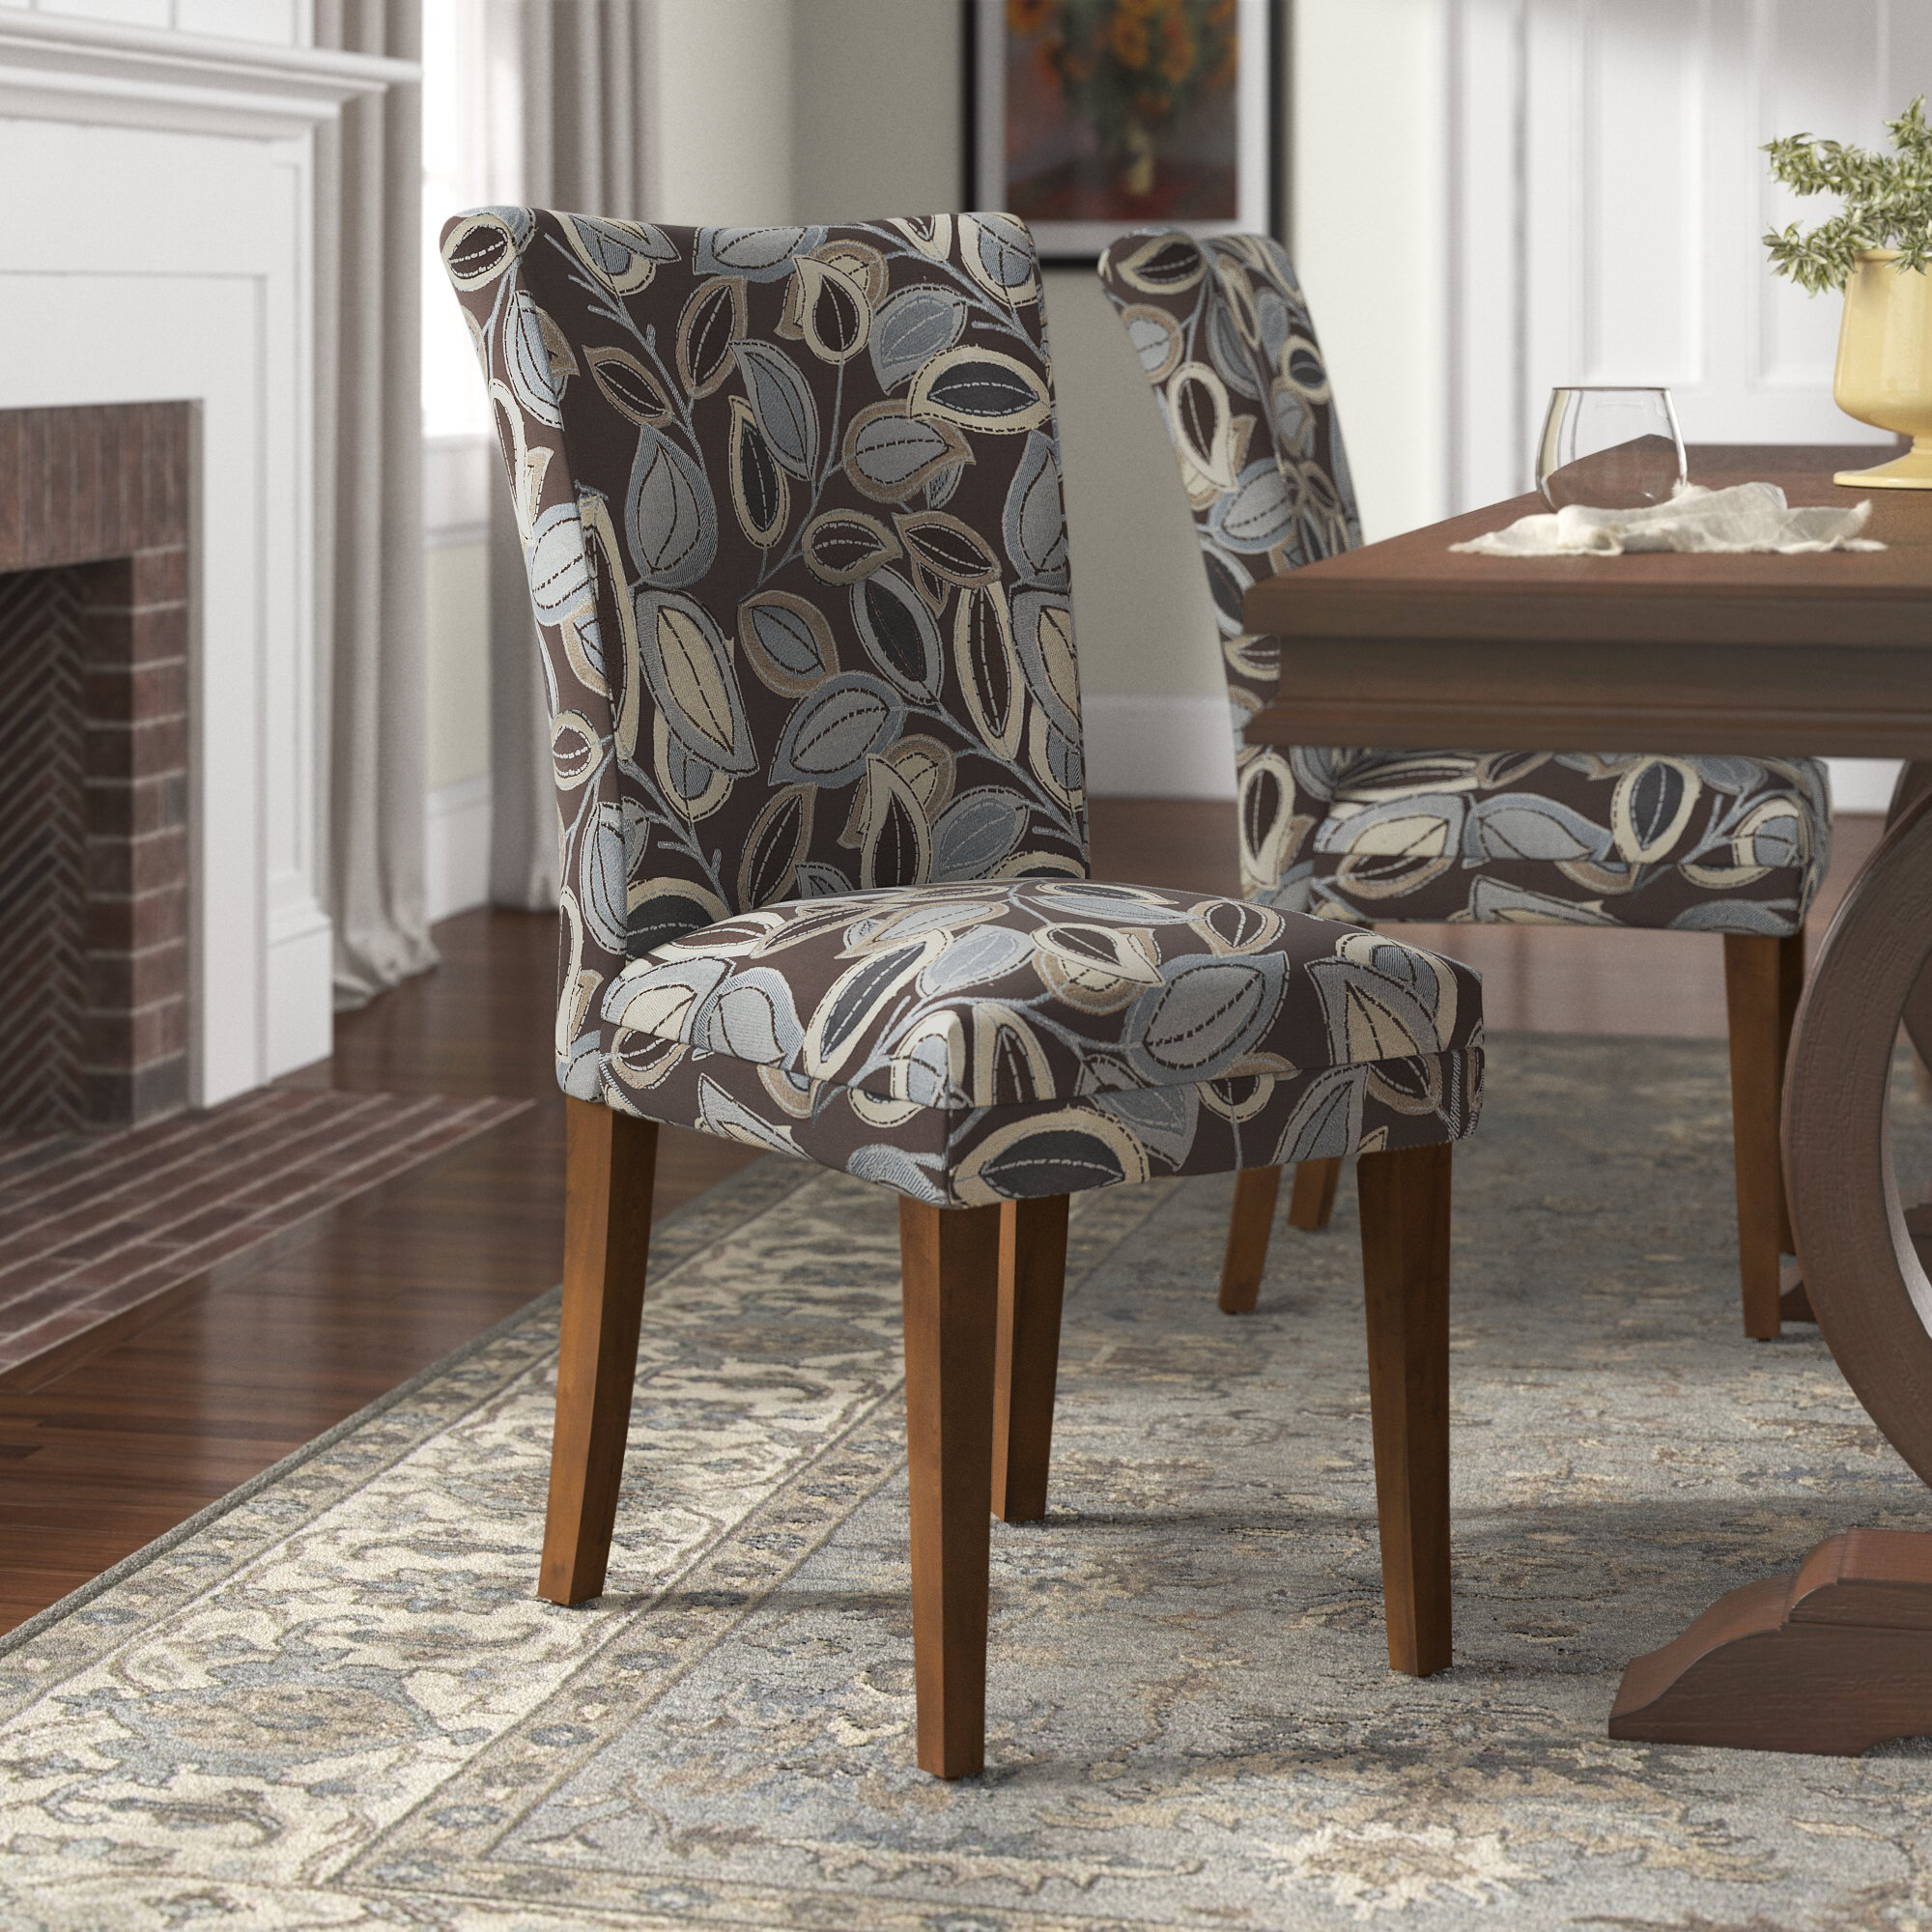 Andover Mills™ Bookout Tufted Upholstered Wooden Dining Chairs & Reviews